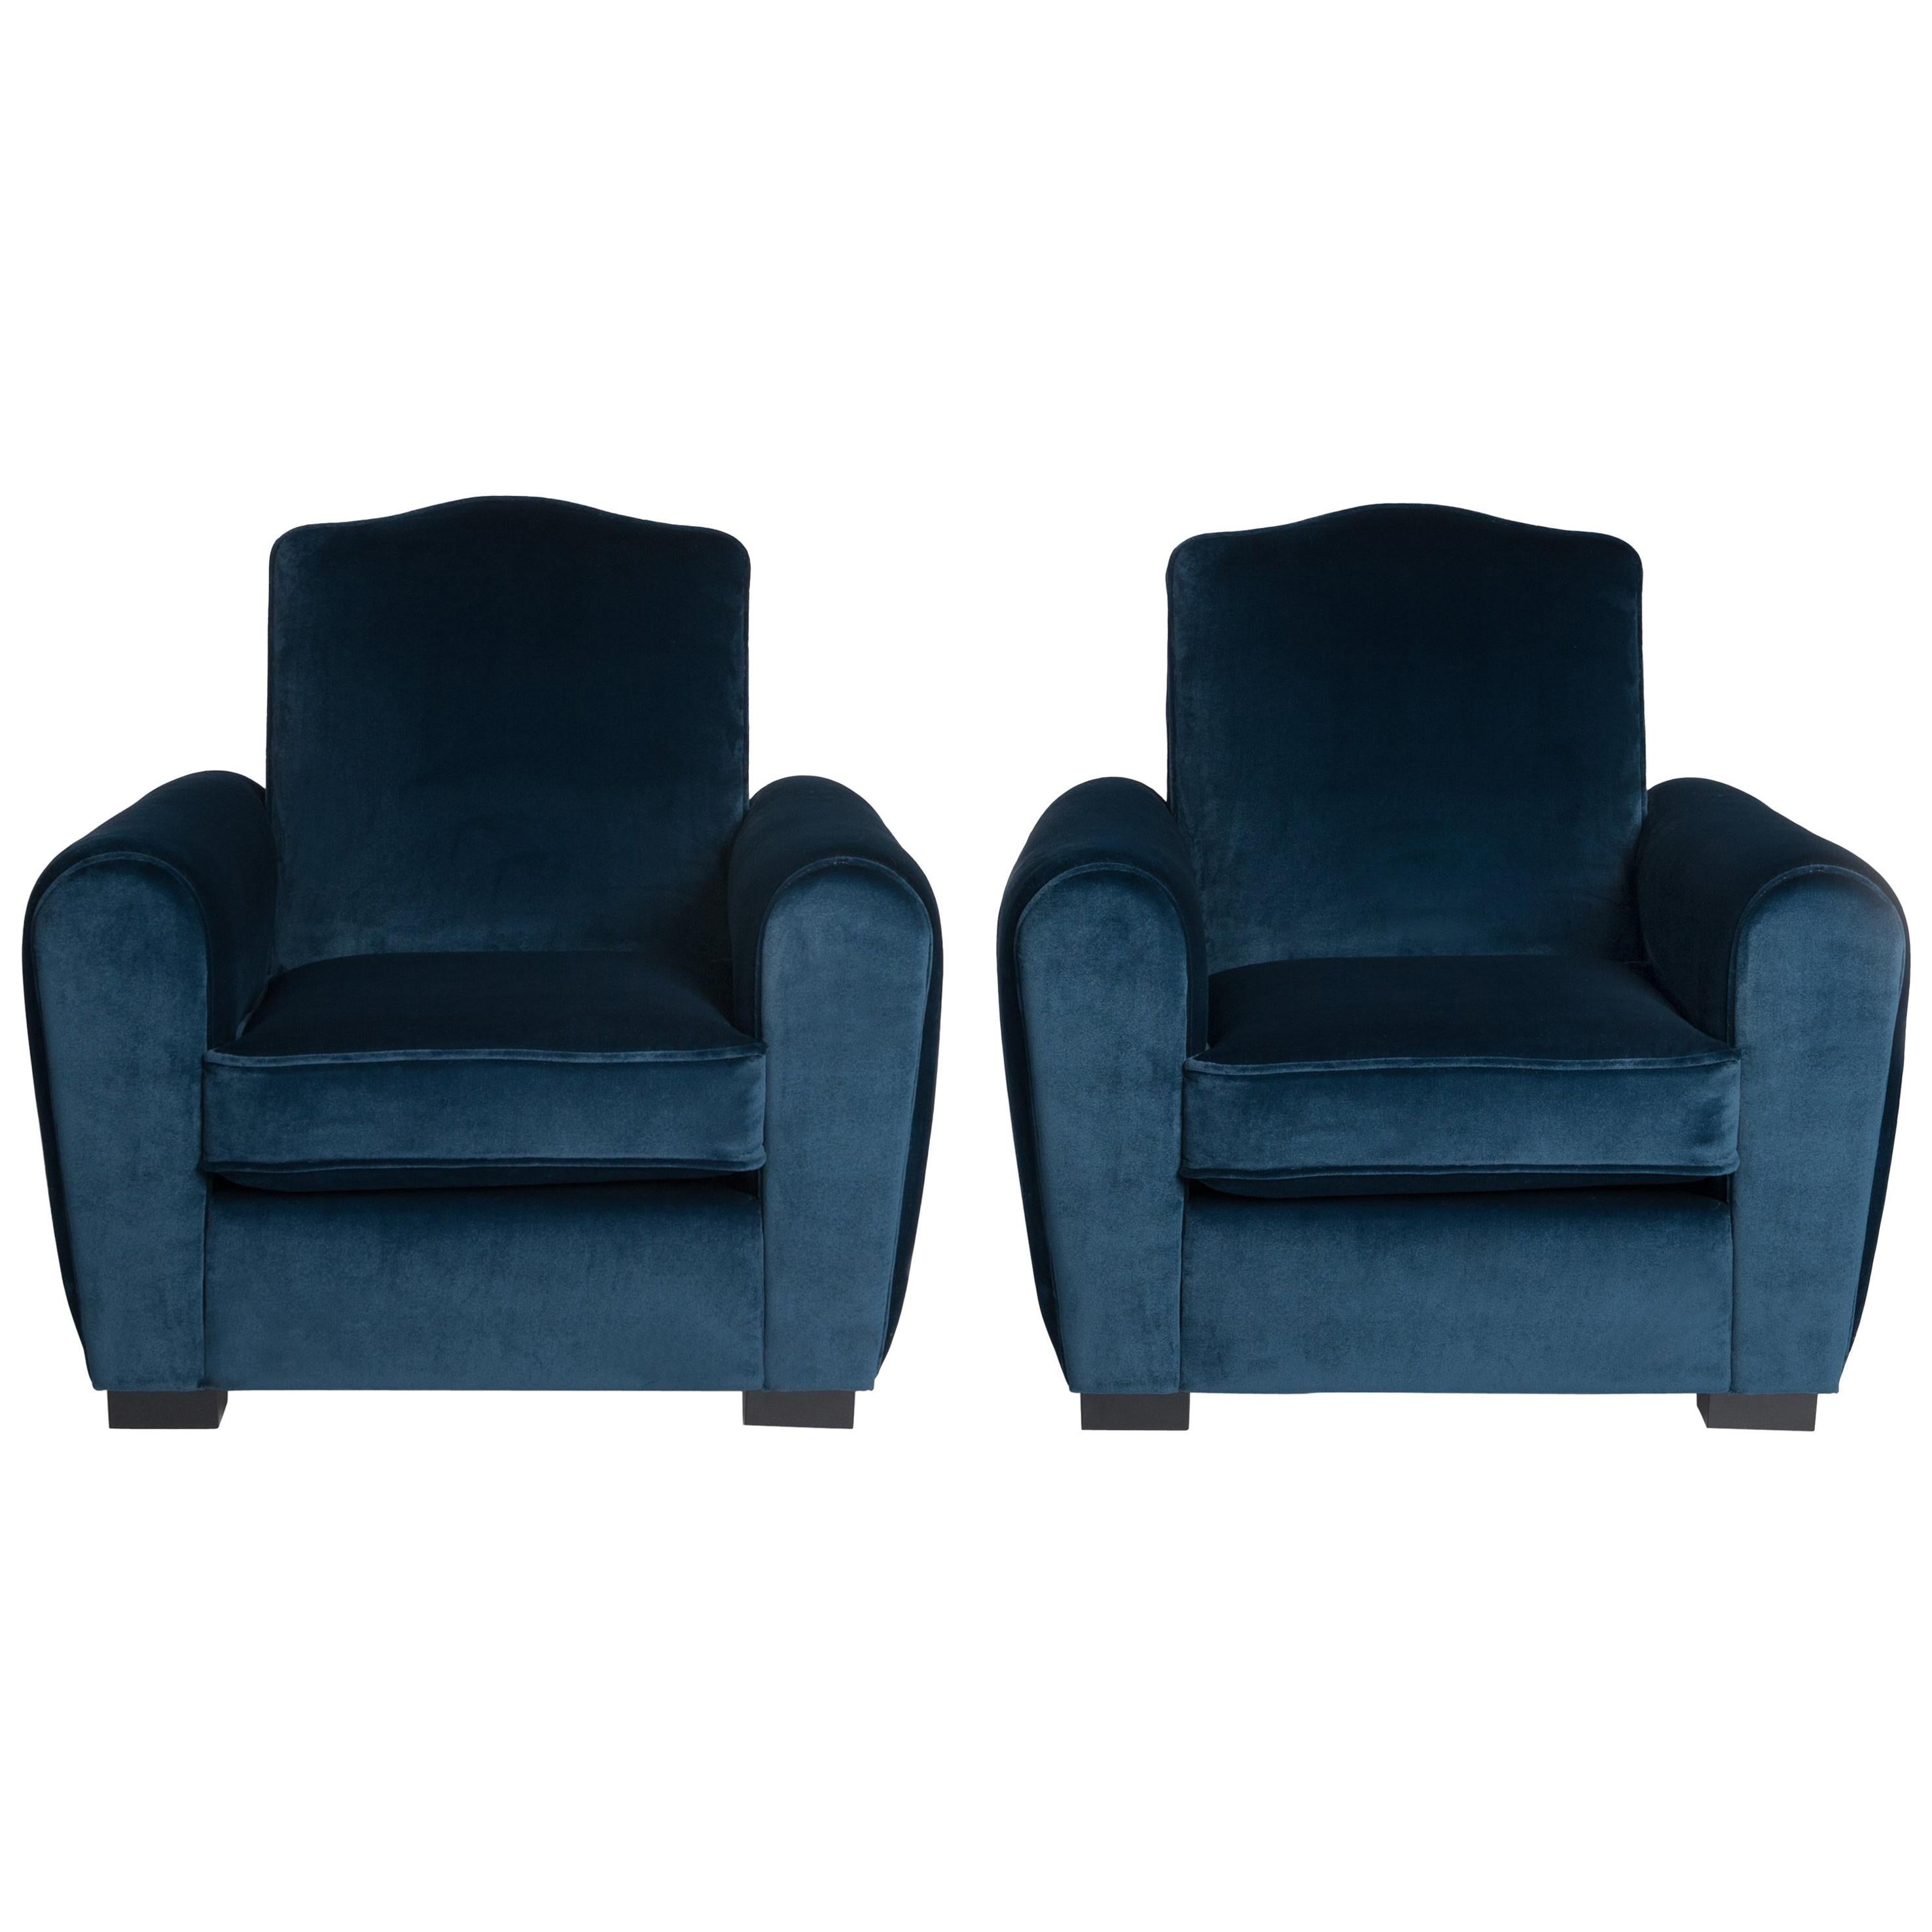 Pair of French Art Deco Armchairs or Club Chairs in Turquois Velvet from Rubelli